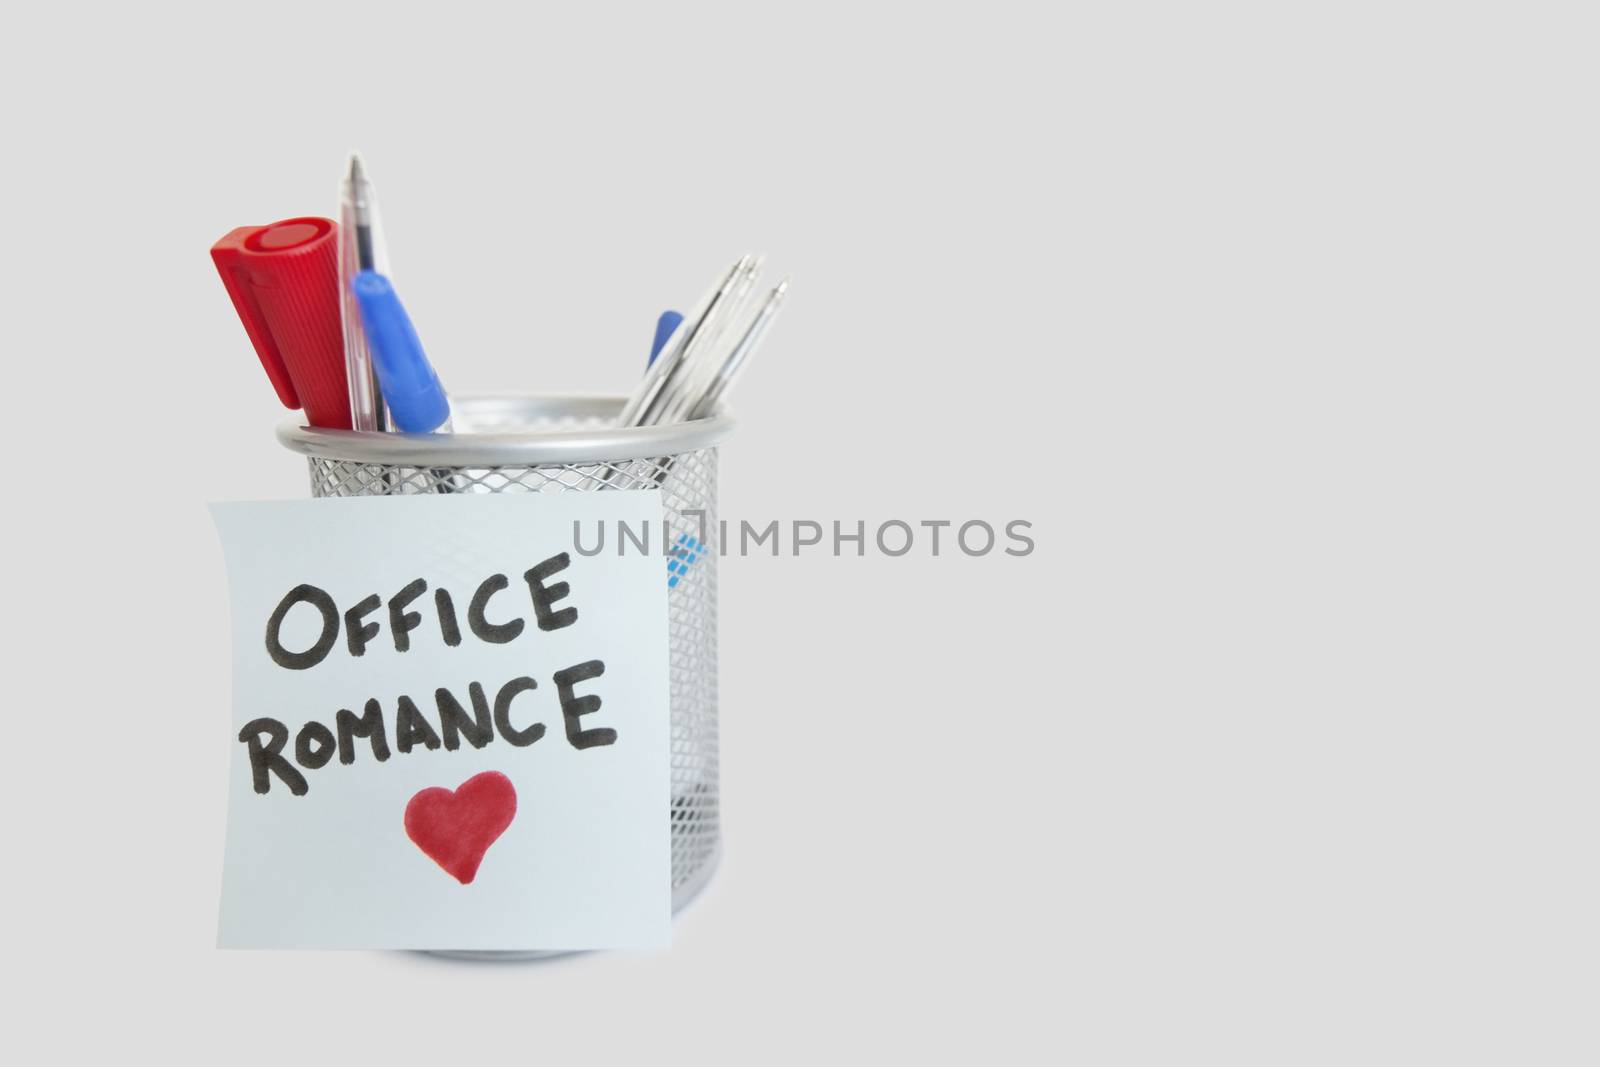 Conceptual image of sticky notepaper with heart shape depicting office romance by moodboard